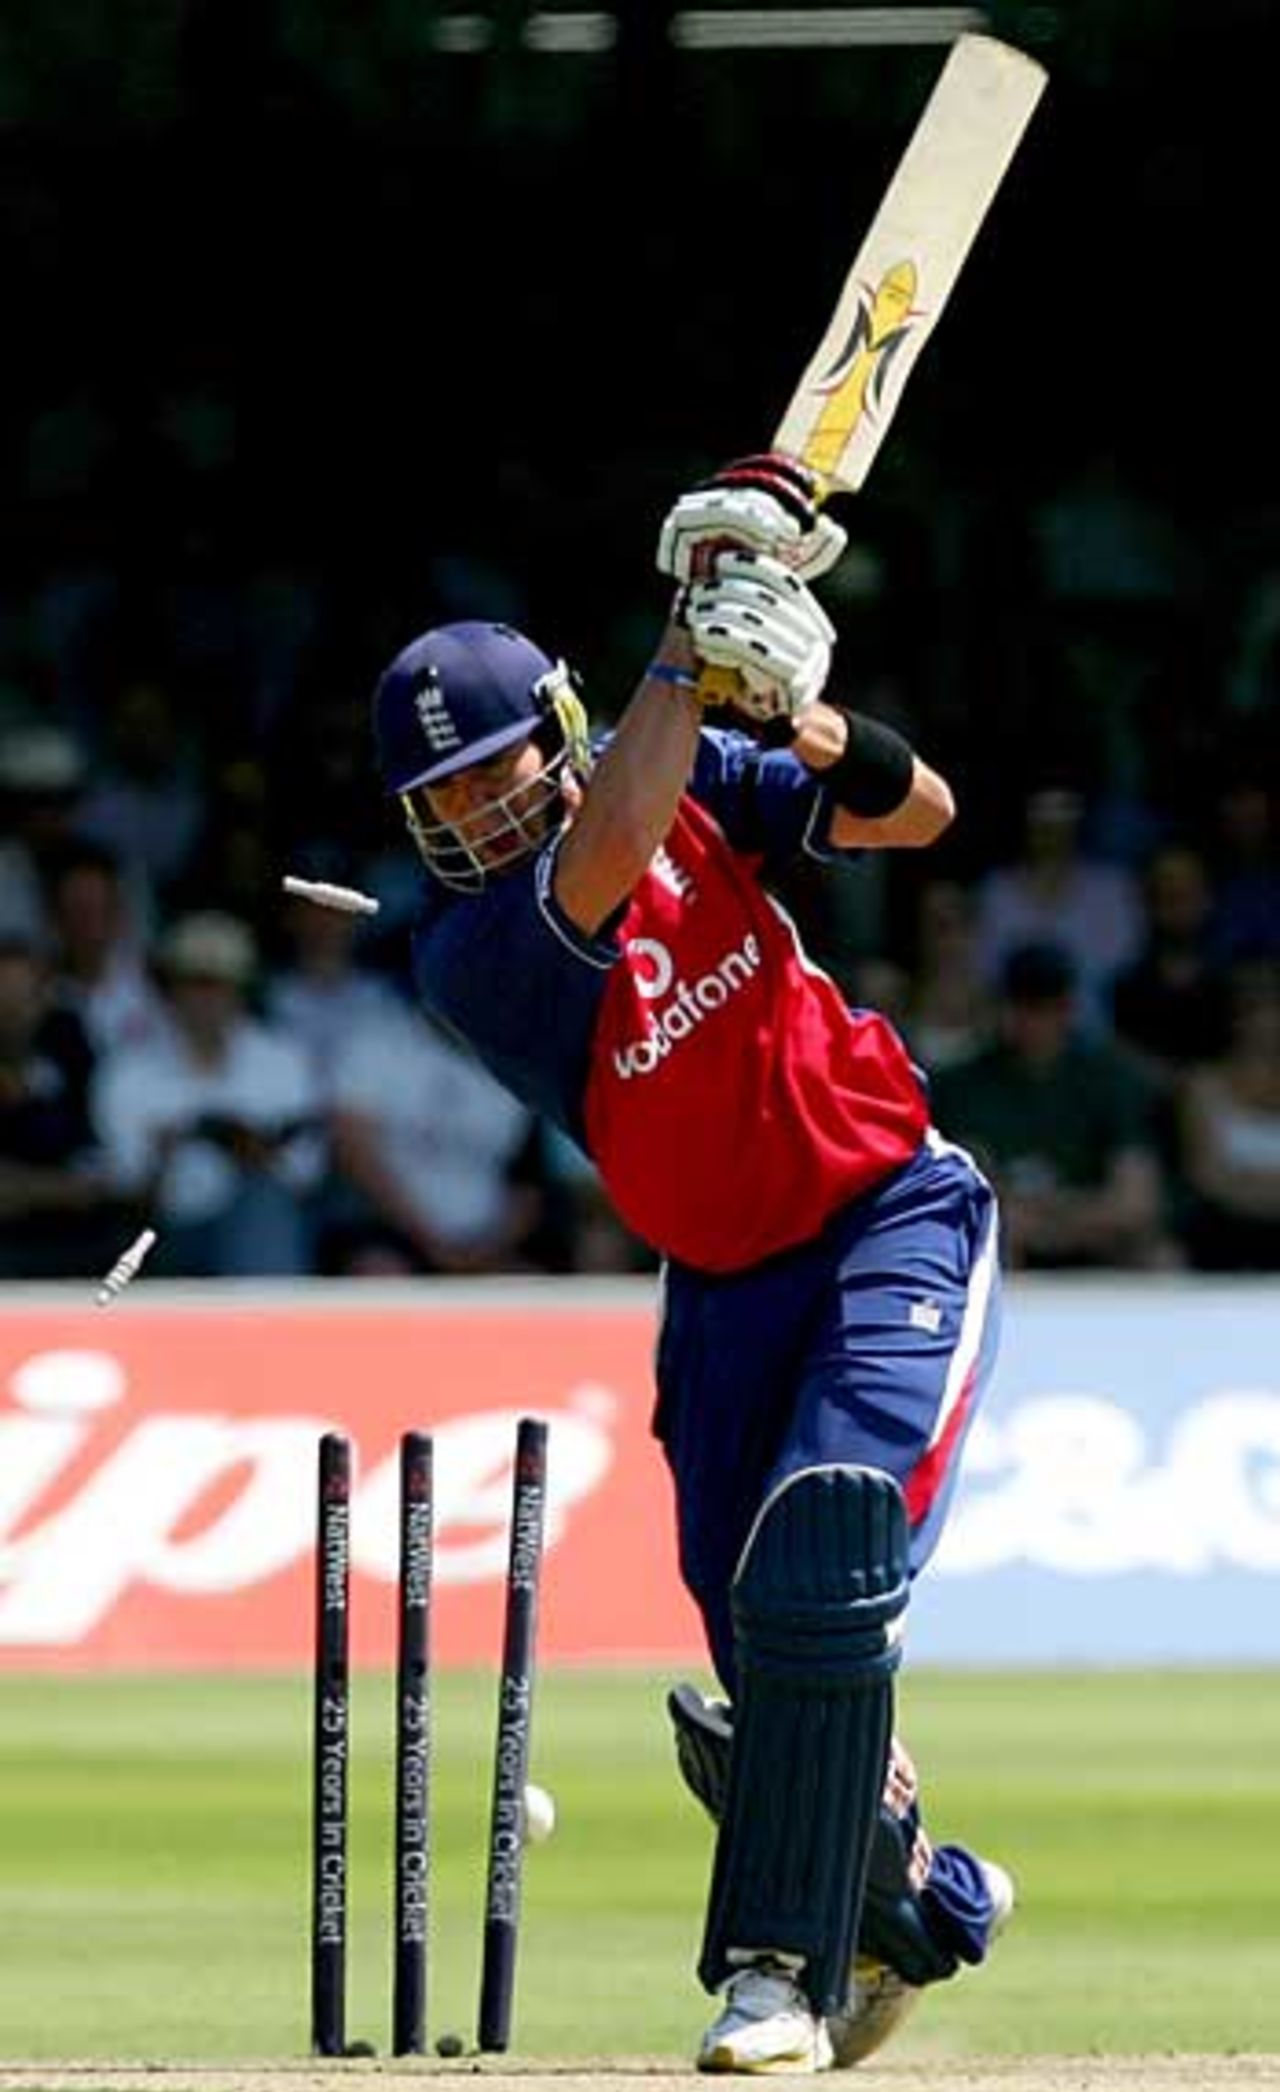 Kevin Pietersen is bowled by Brett Lee, England v Australia, NatWest Challenge, Lord's, July 10